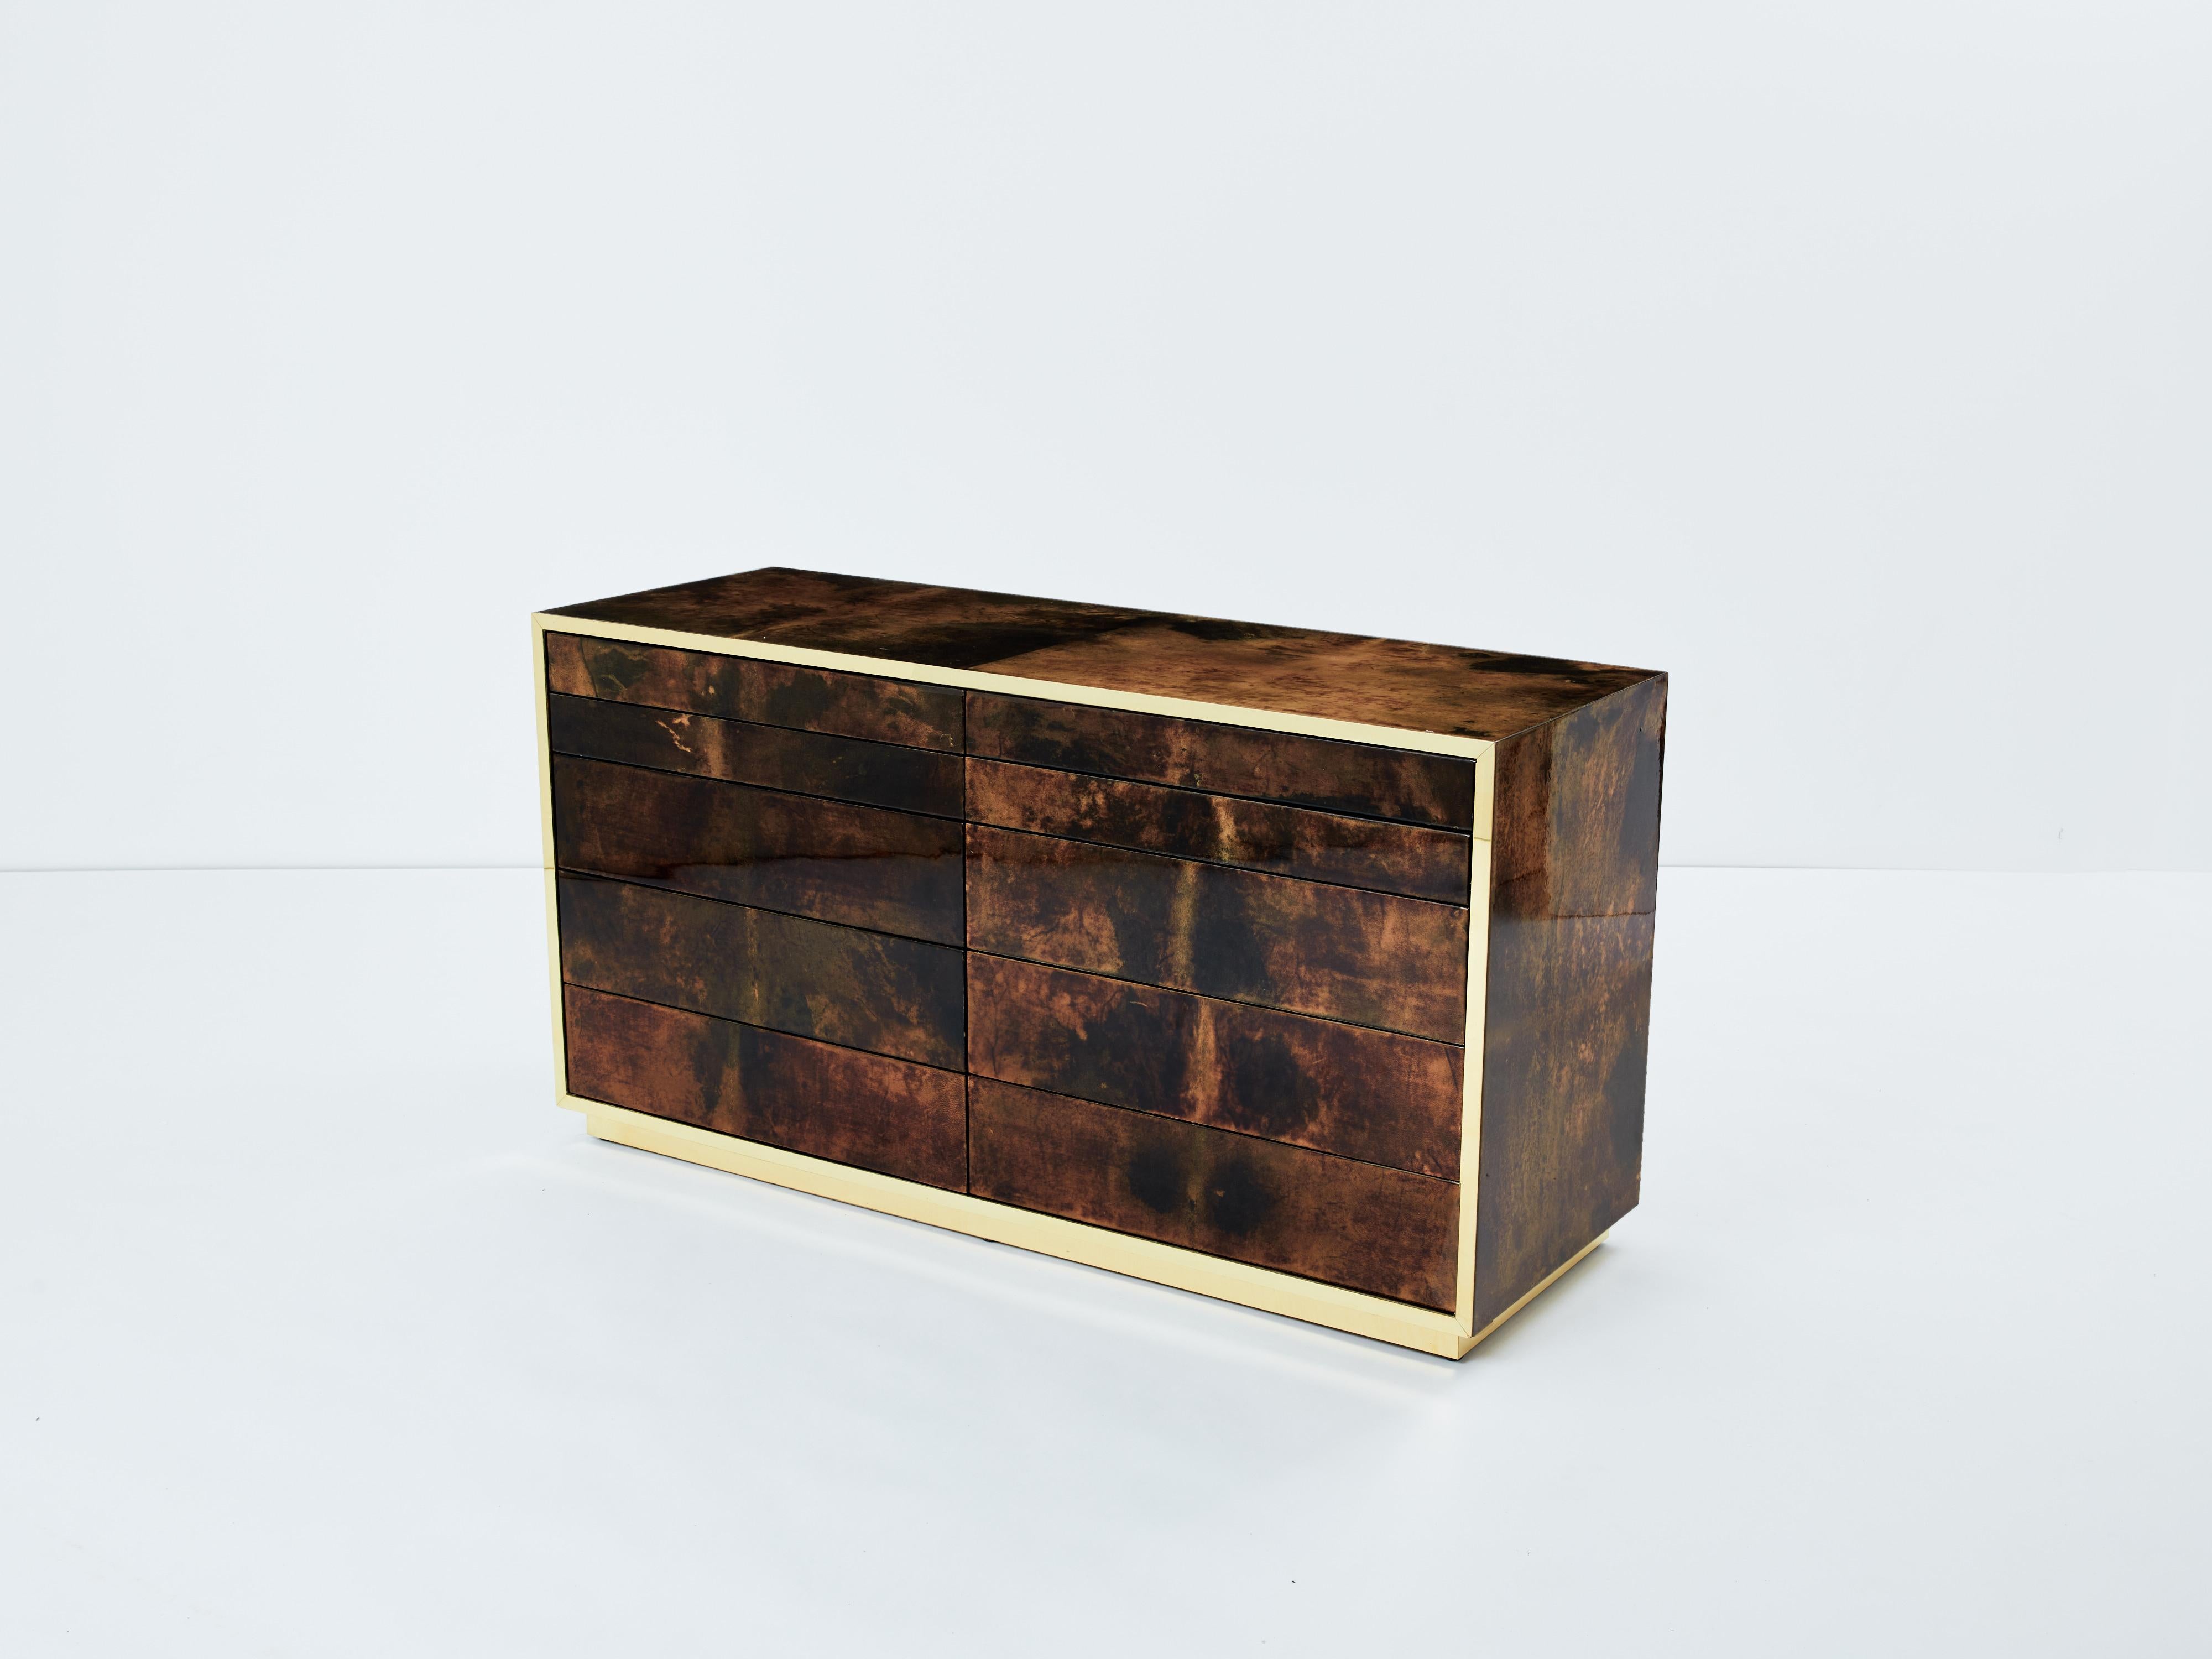 A unique and timeless vintage piece, this Aldo Tura mid-century commode feels imposing and glamourous. The varnished goatskin parchment, in rich shades of brown and dark brown, makes this chest of drawers typical of designer Aldo Tura. Its boxy